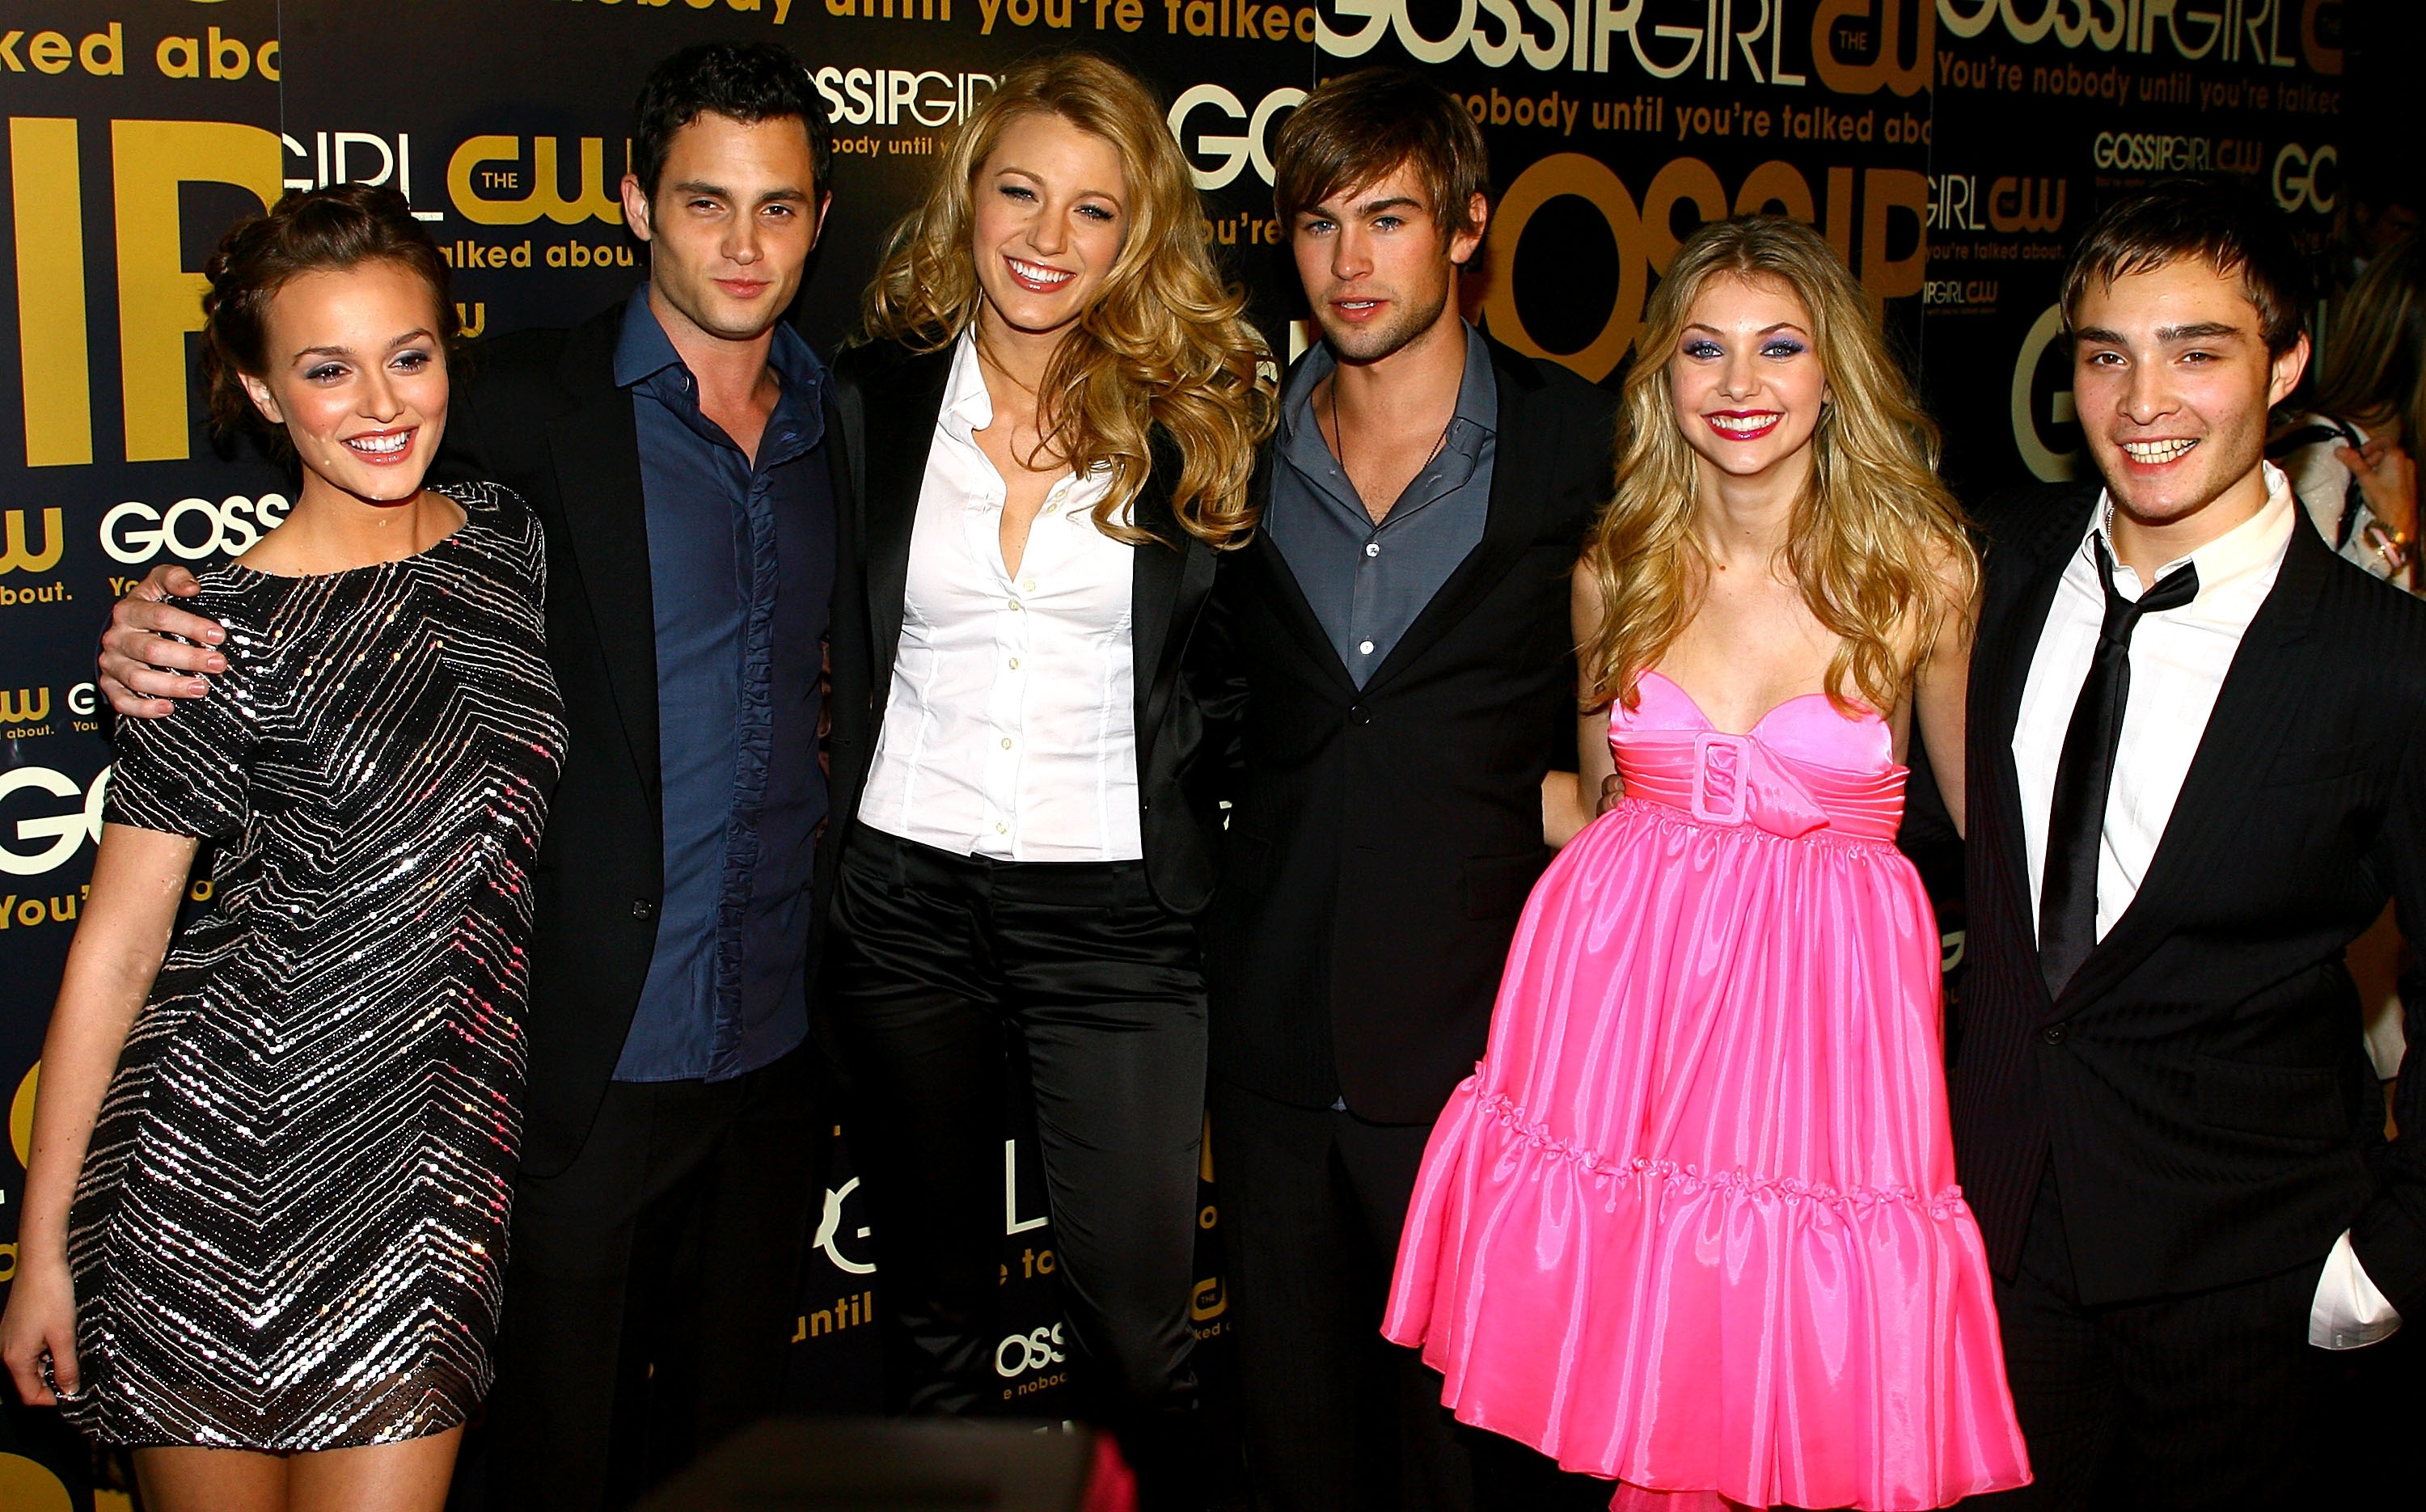 Is Gossip Girl making a comeback with the original cast?